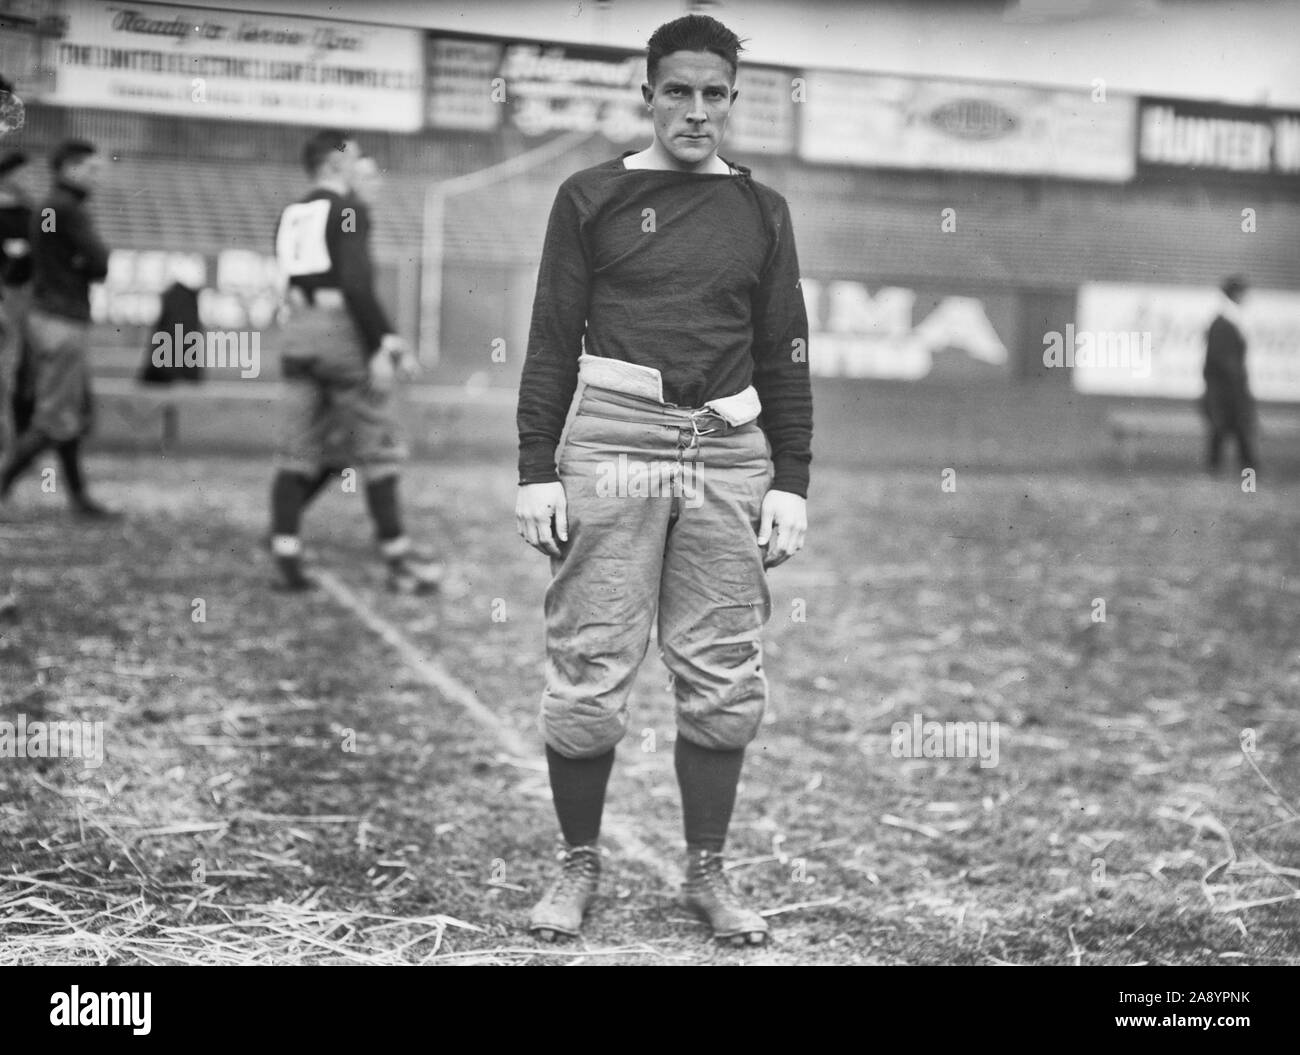 Johnny Spiegel - Photograph shows Johnny Spiegel, a halfback football player on the Washington & Jefferson College team that played against Rutgers University at the Polo Grounds in New York City on November 28, 1914. Stock Photo